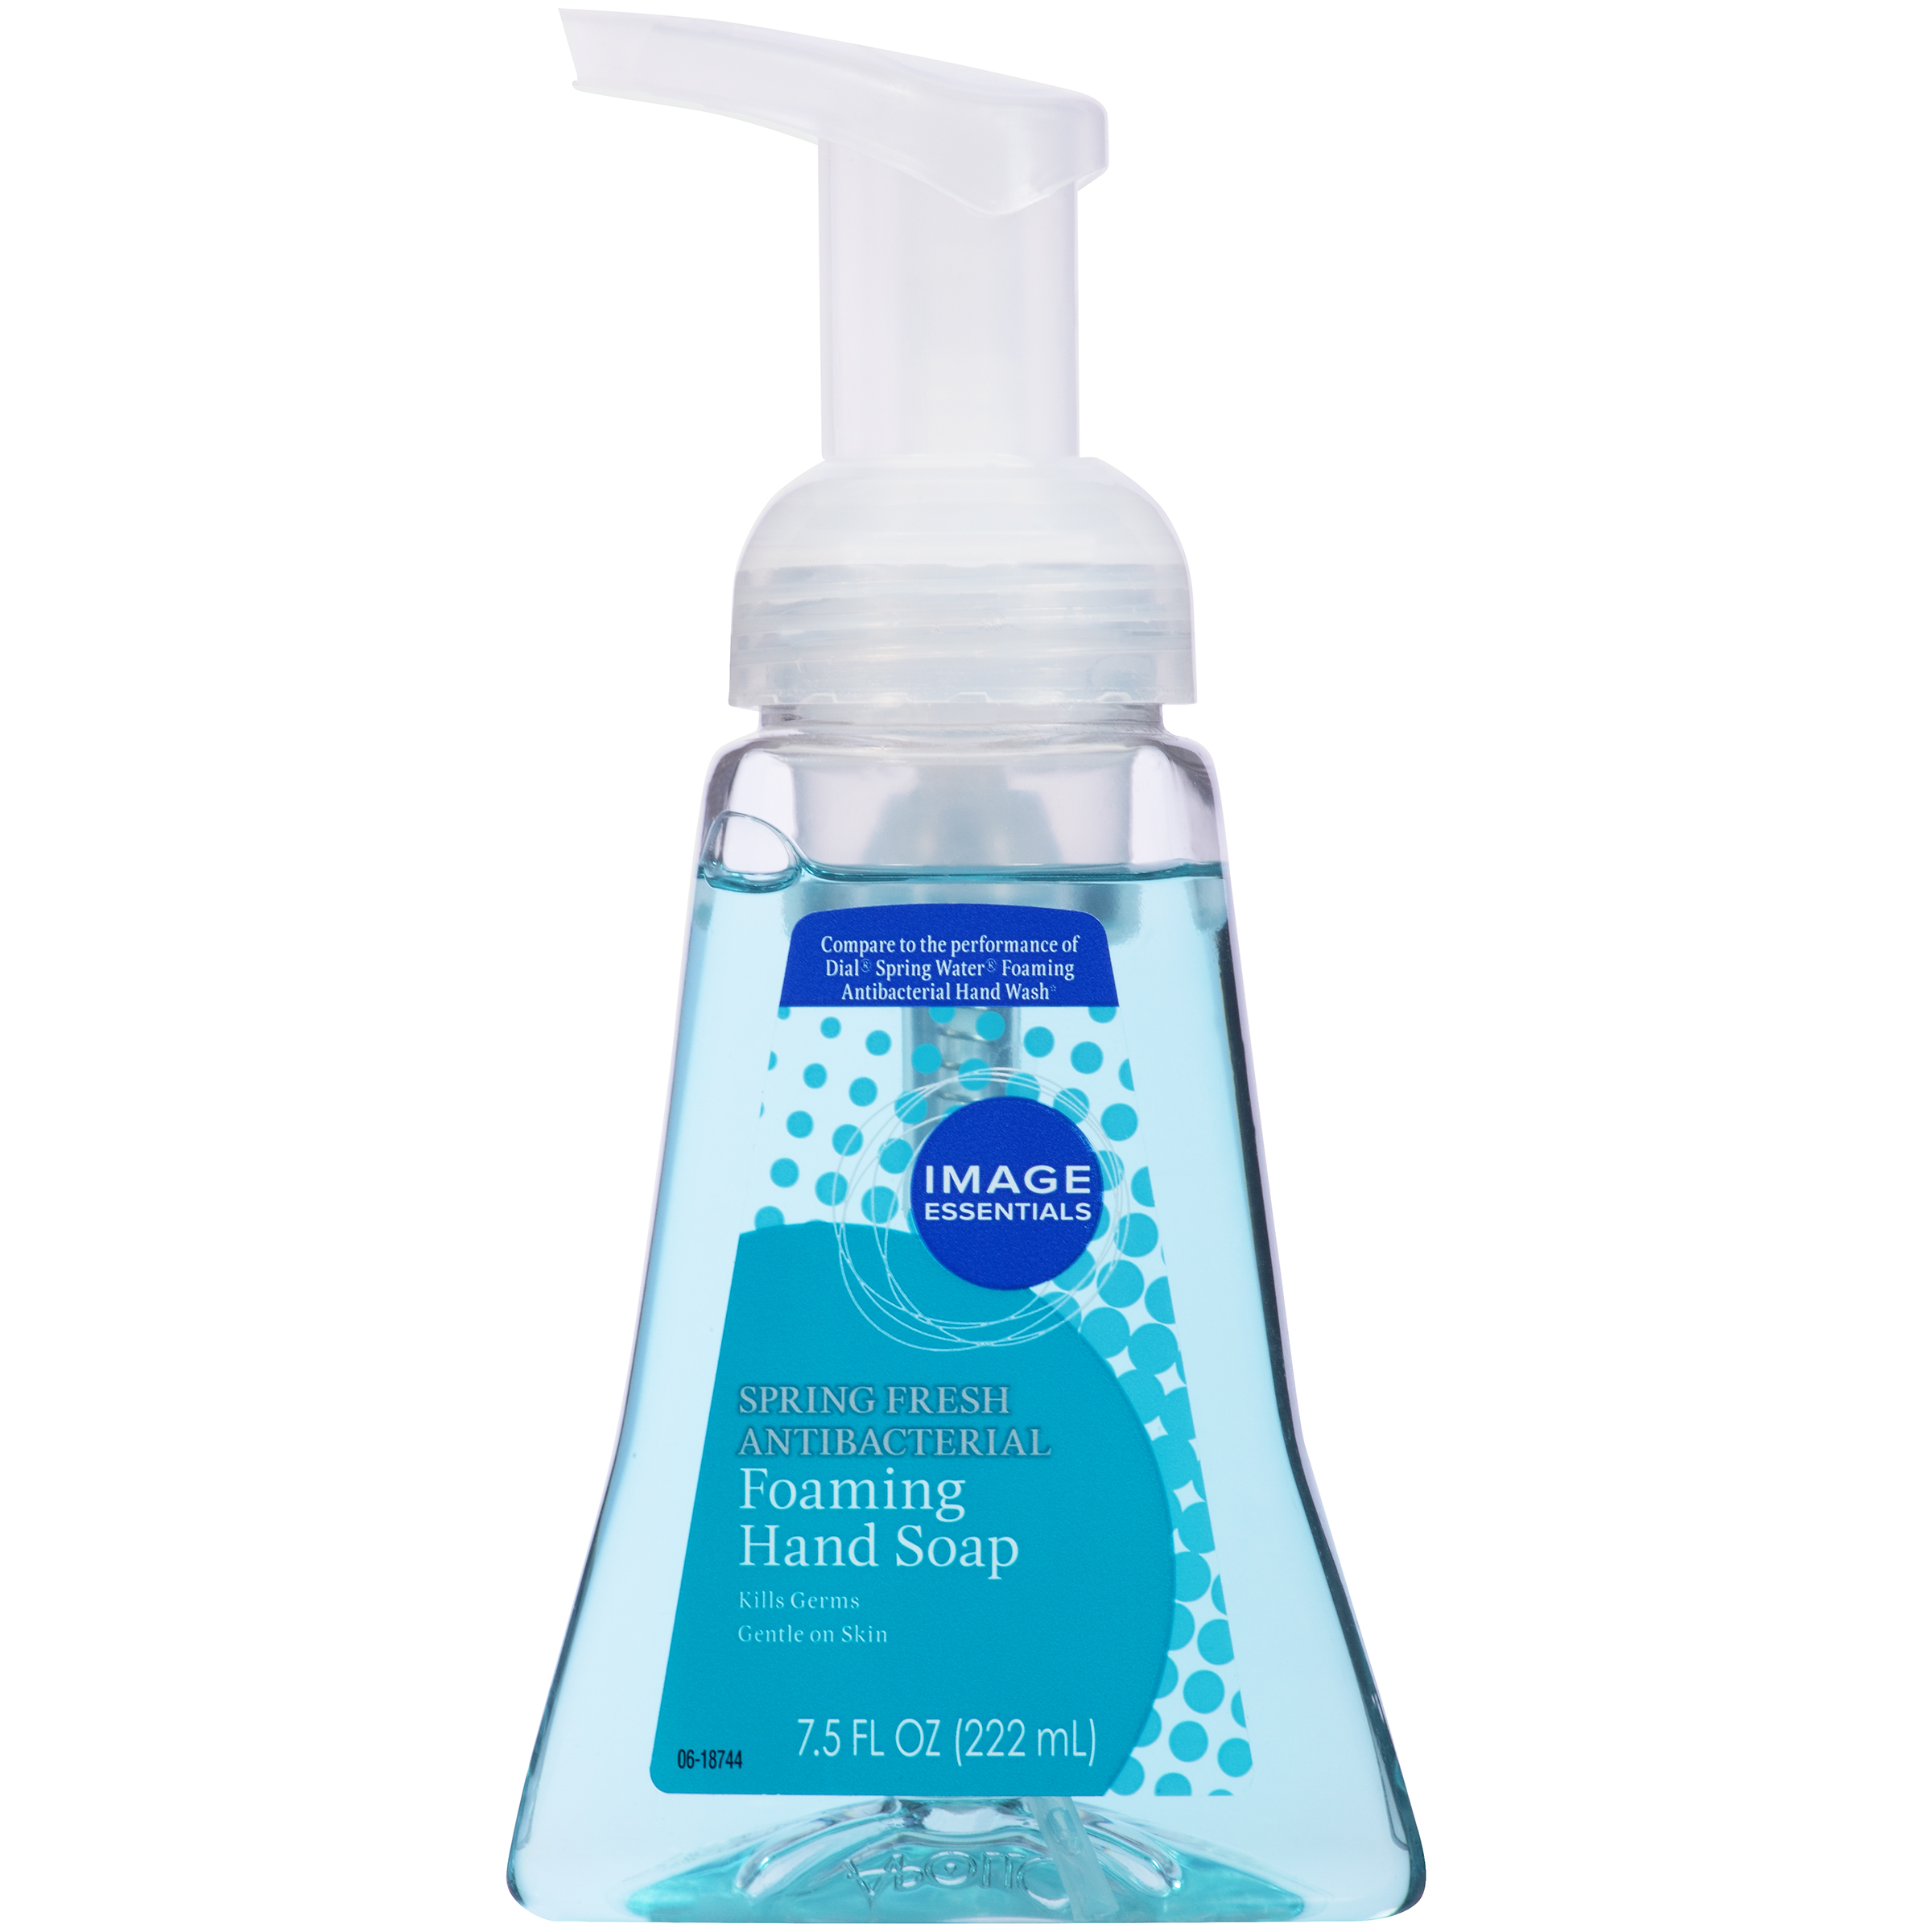 Image Essentials Foaming Hand Soap, Spring Water, .5 fl oz